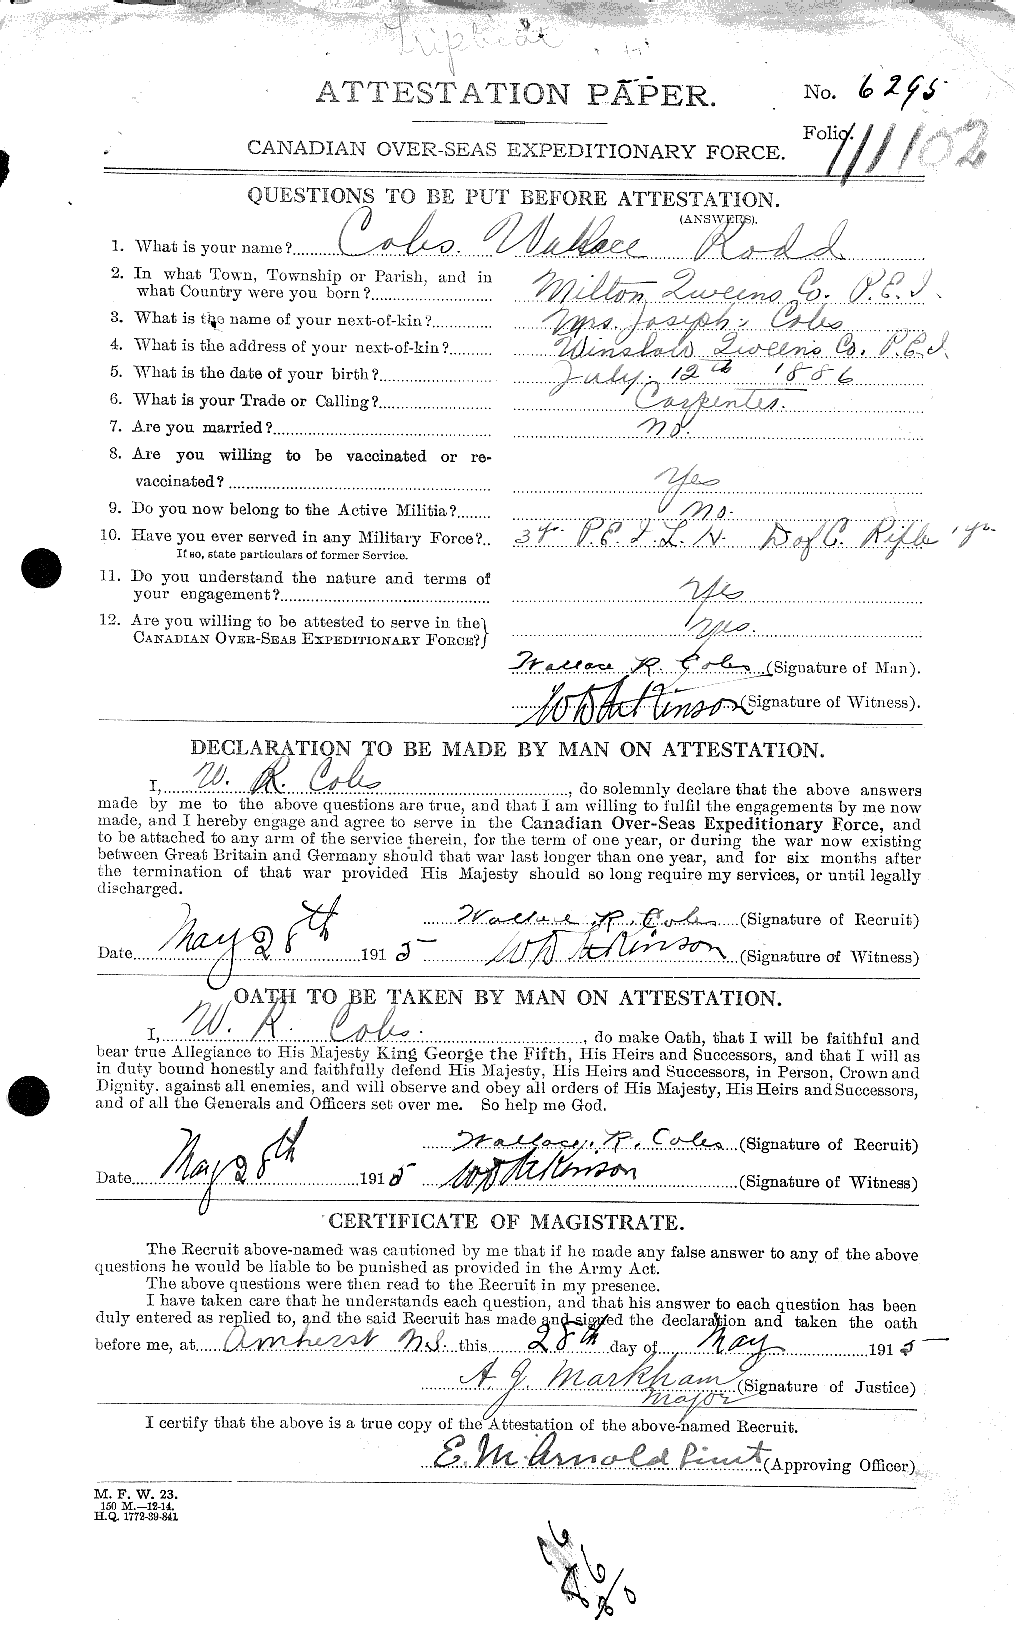 Personnel Records of the First World War - CEF 028423a